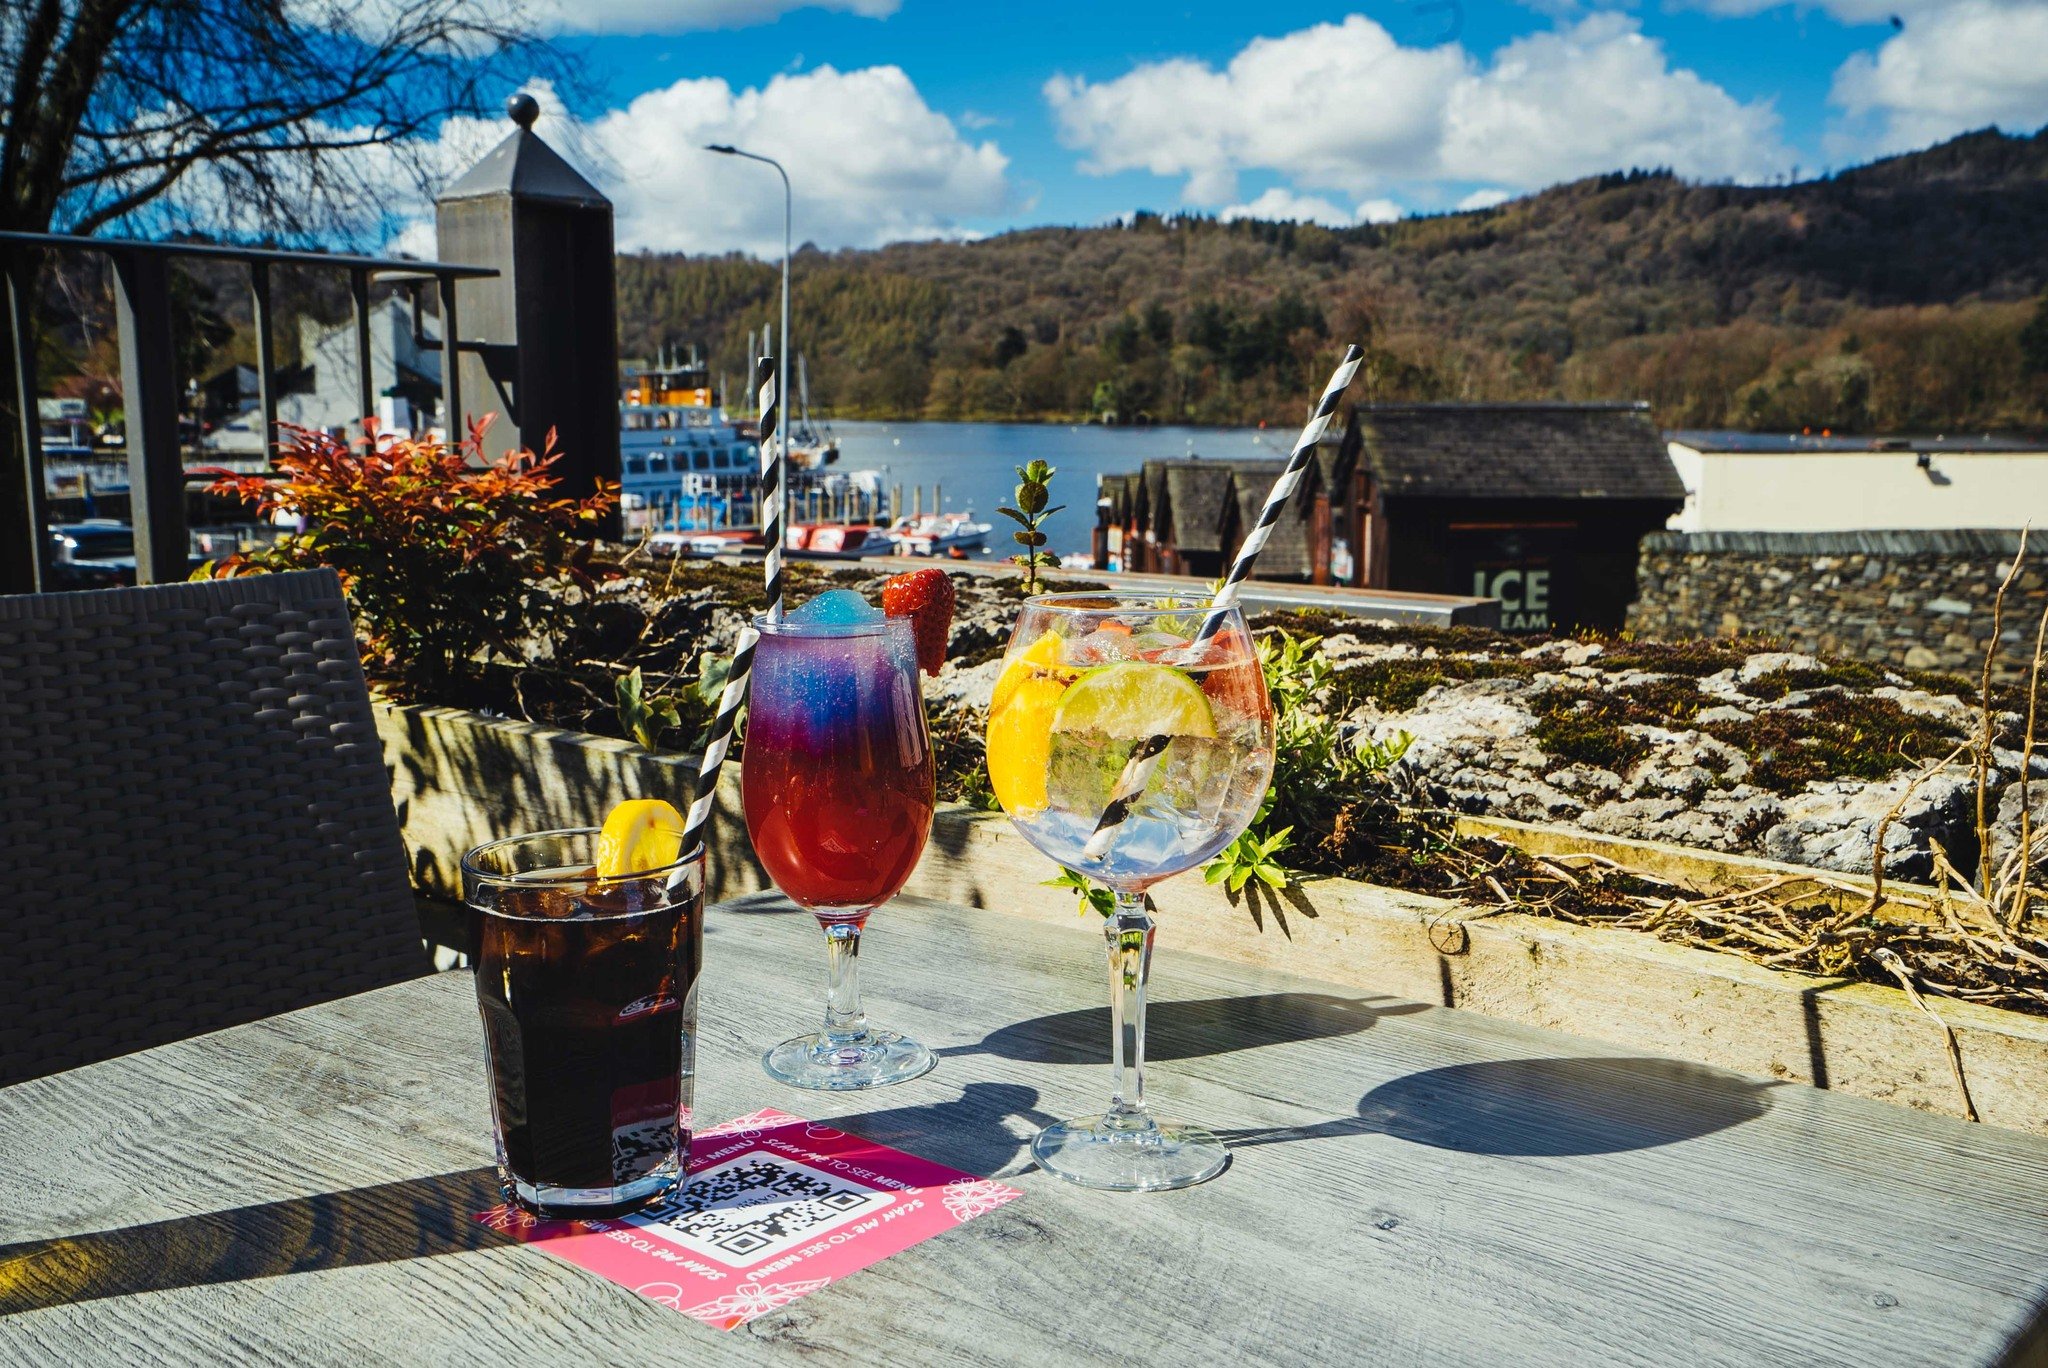 🌟 Get ready for an unforgettable bank holiday experience! 🎉 Tomorrow's the big day, and Lake View Garden Bar is the place to be for some well-deserved relaxation and fun! 🍹🌳

Join us for a laid-back day filled with refreshing drinks, delicious bi